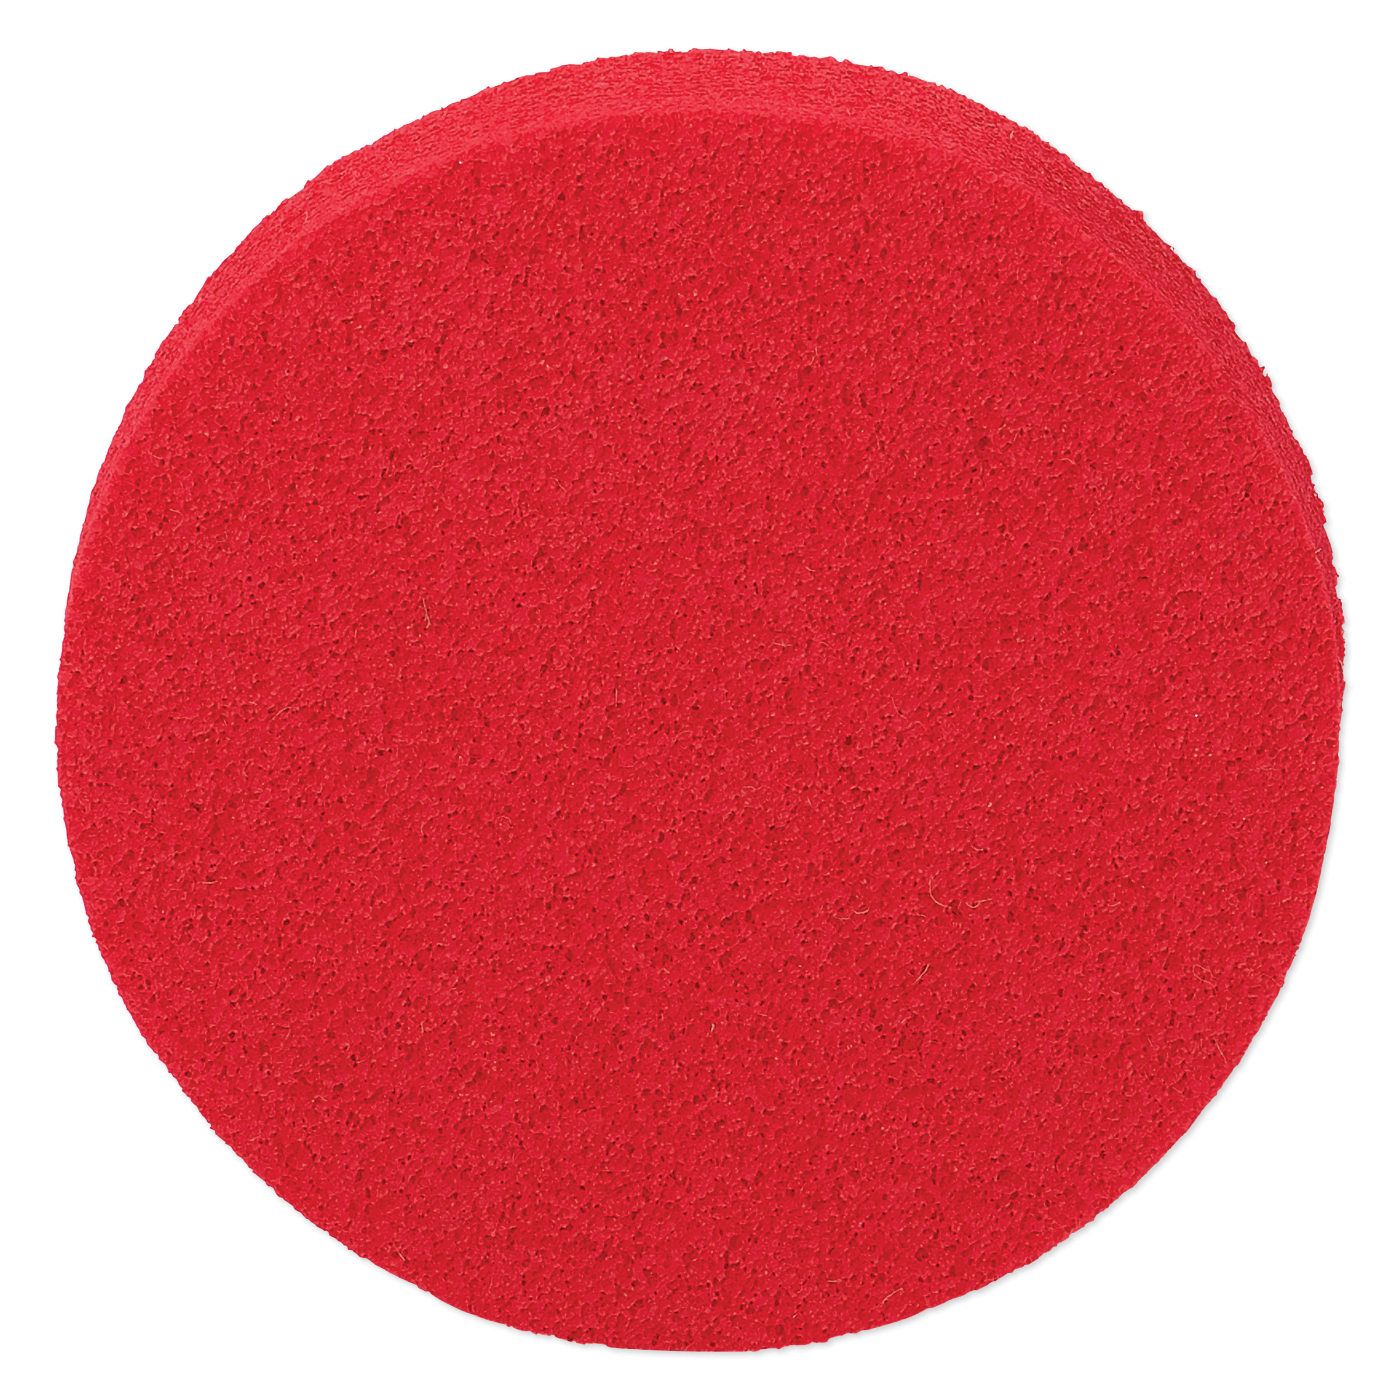 Makeup Cosmetic Sponge, Extra Thick